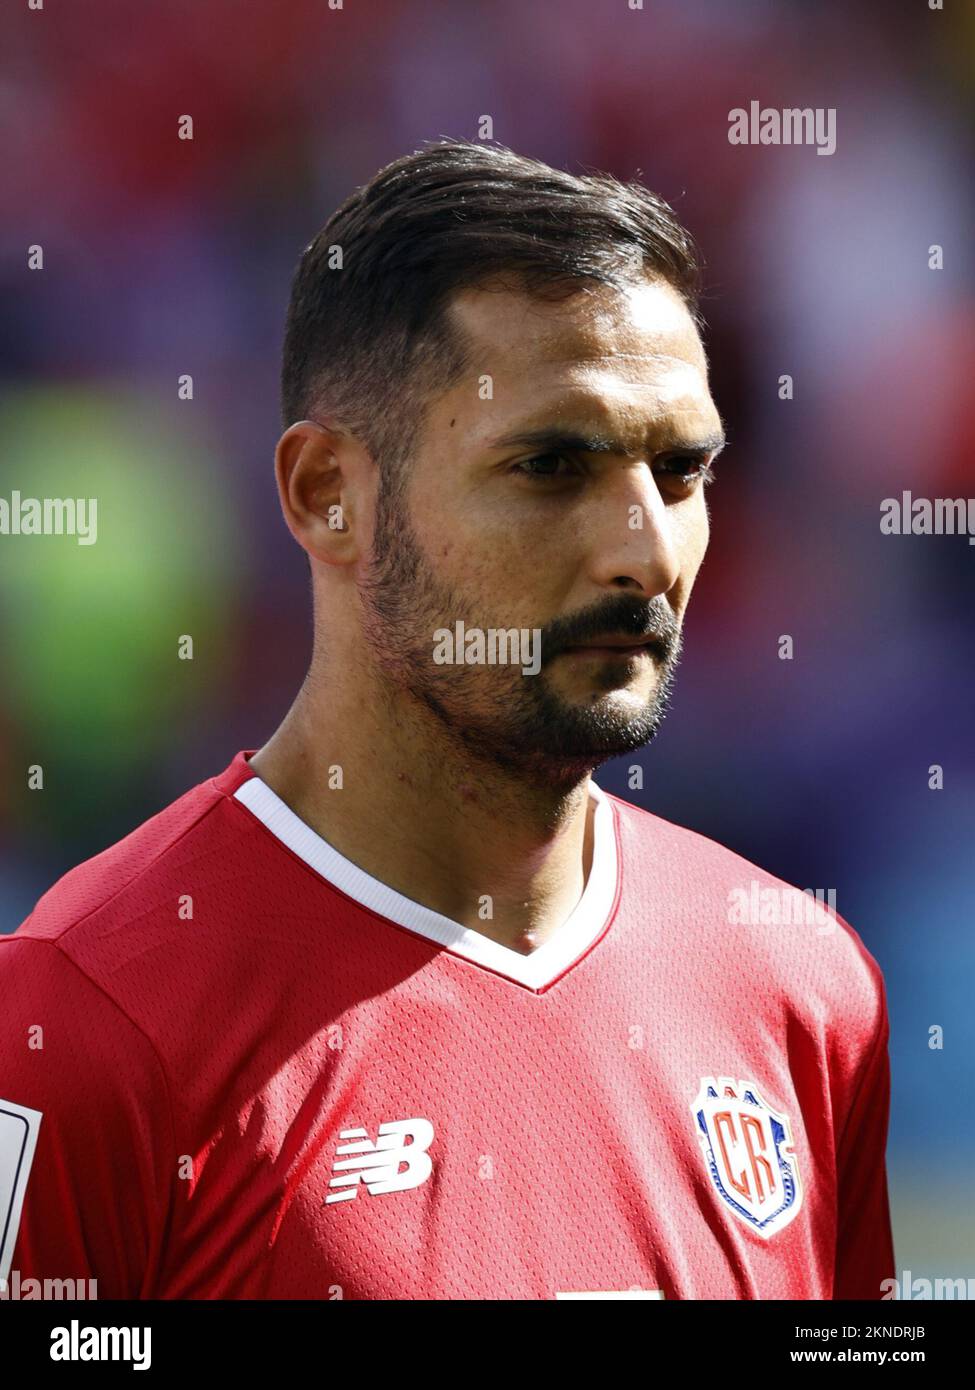 AL-RAYYAN - Celso Borges of Costa Rica during the FIFA World Cup Qatar 2022 group E match between Japan and Costa Rica at Ahmad Bin Ali Stadium on November 27, 2022 in Al-Rayyan, Qatar. AP | Dutch Height | MAURICE OF STONE Stock Photo